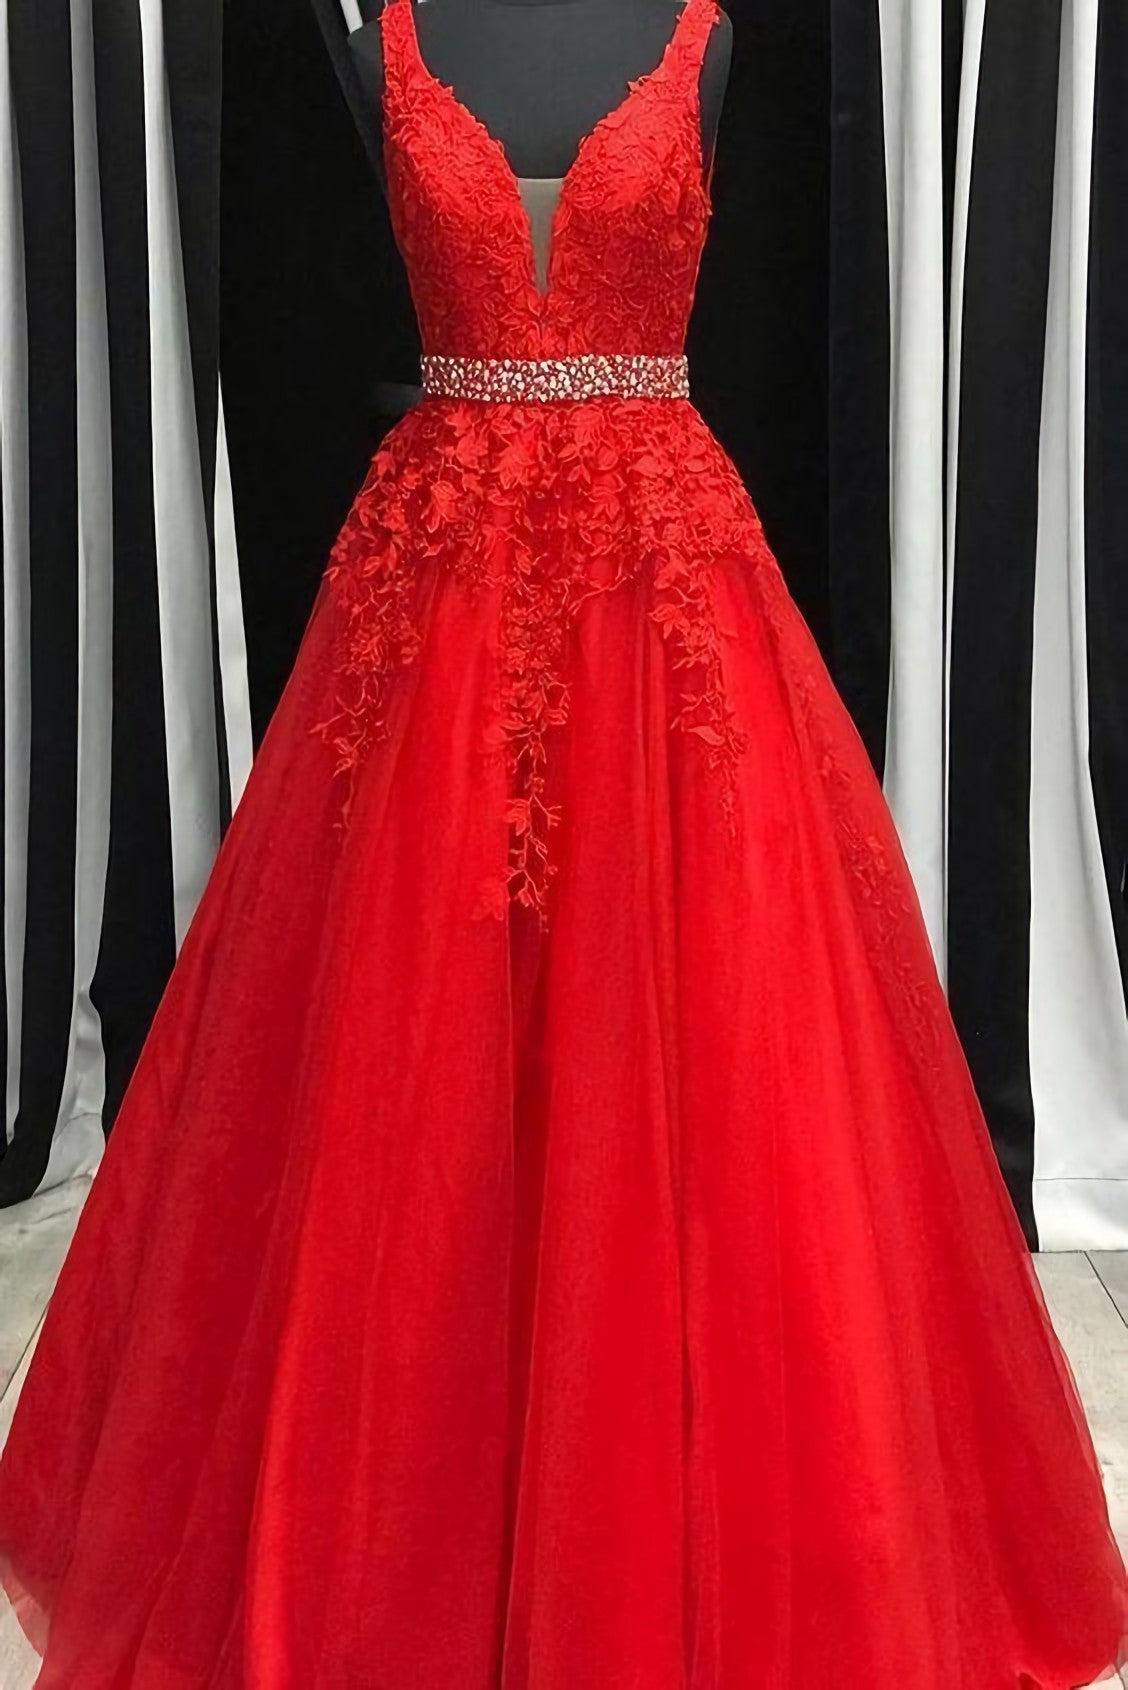 Prom Dress Red, Red Lace Prom Dresses, Applique Party Dresses, A Line Evening Prom Dress